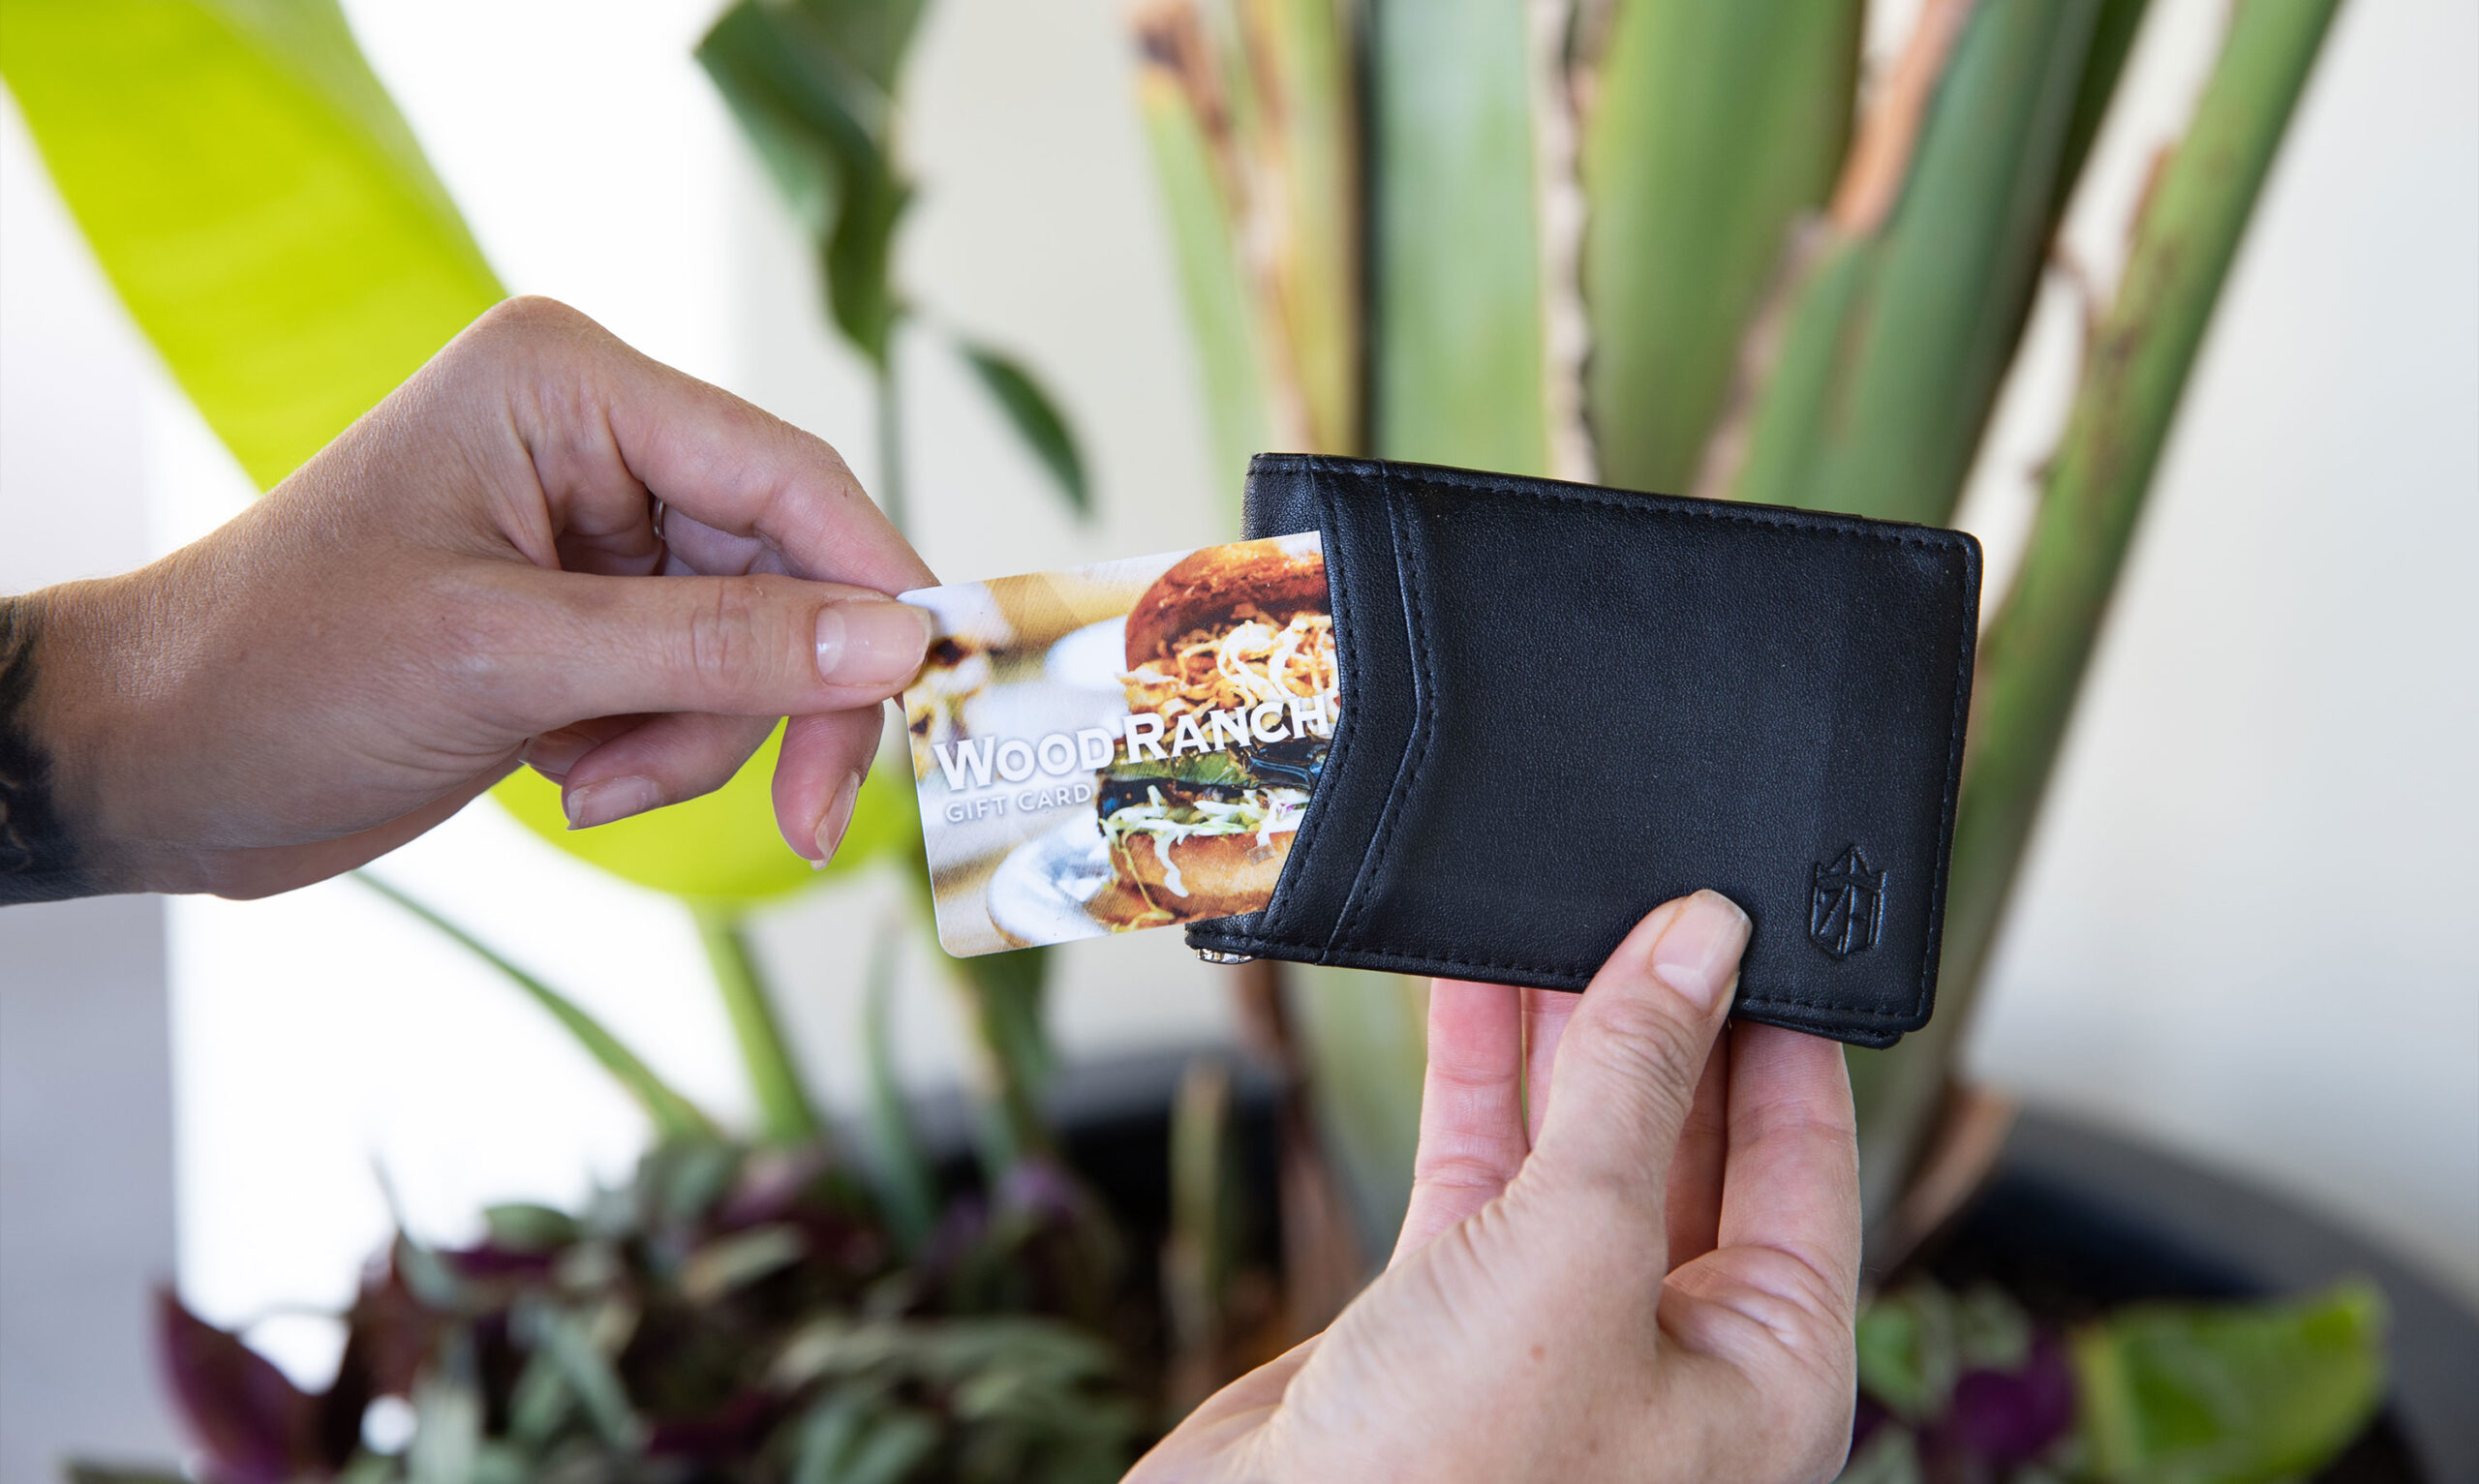 A person's hands are shown pulling a Wood Ranch BBQ & Grill gift card out of a black leather wallet with a plant in soft focus in the background.